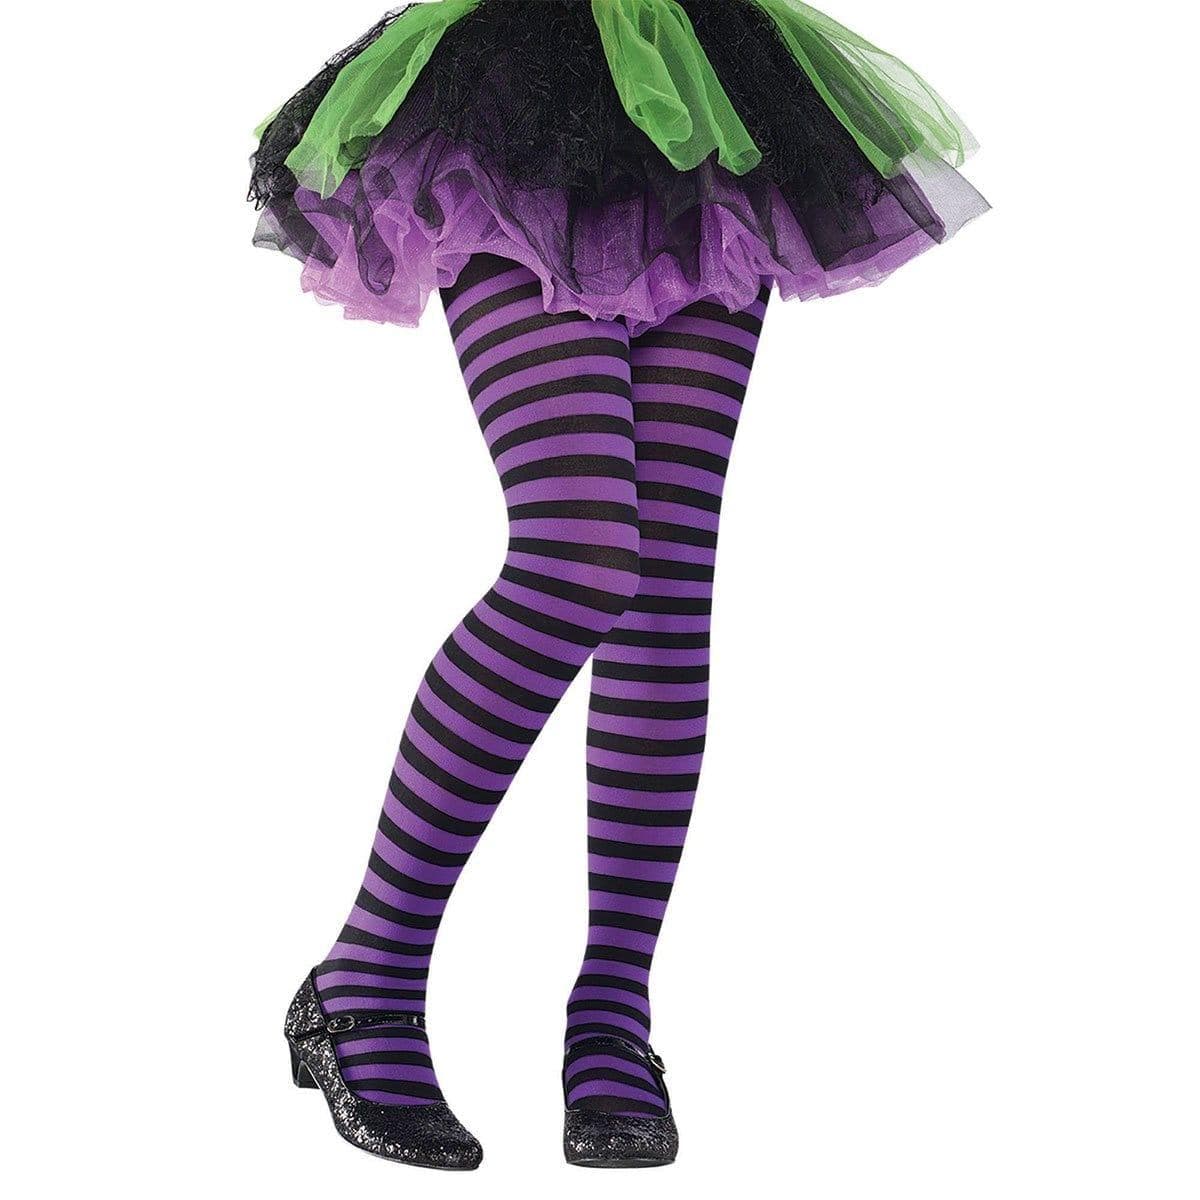 Buy Costume Accessories Purple & Black Striped Tights for Kids sold at Party Expert